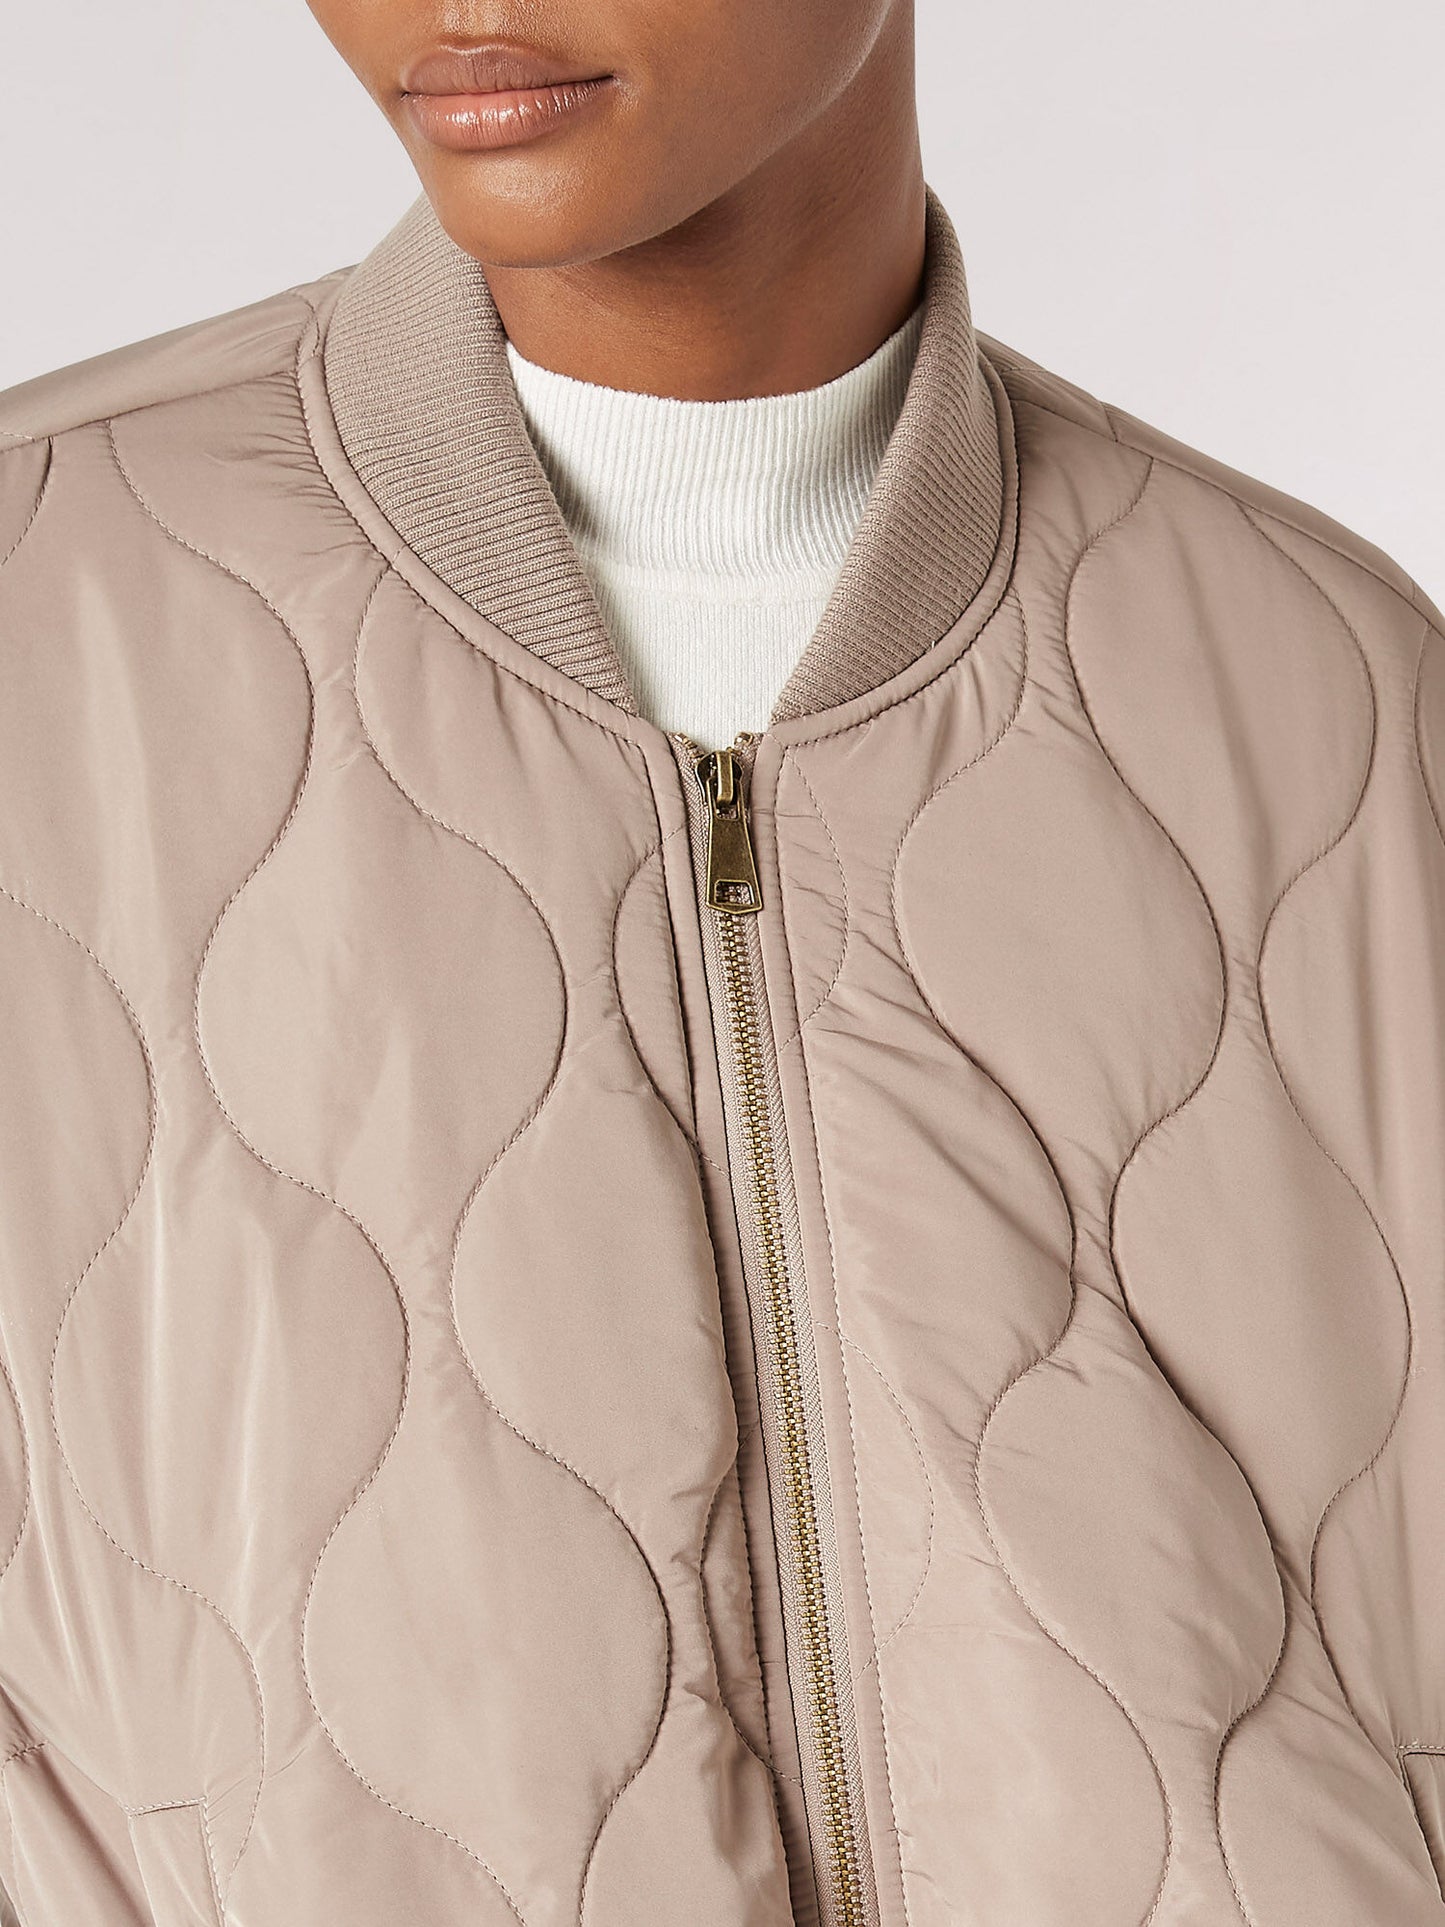 Onion Quilted Bomber Jacket